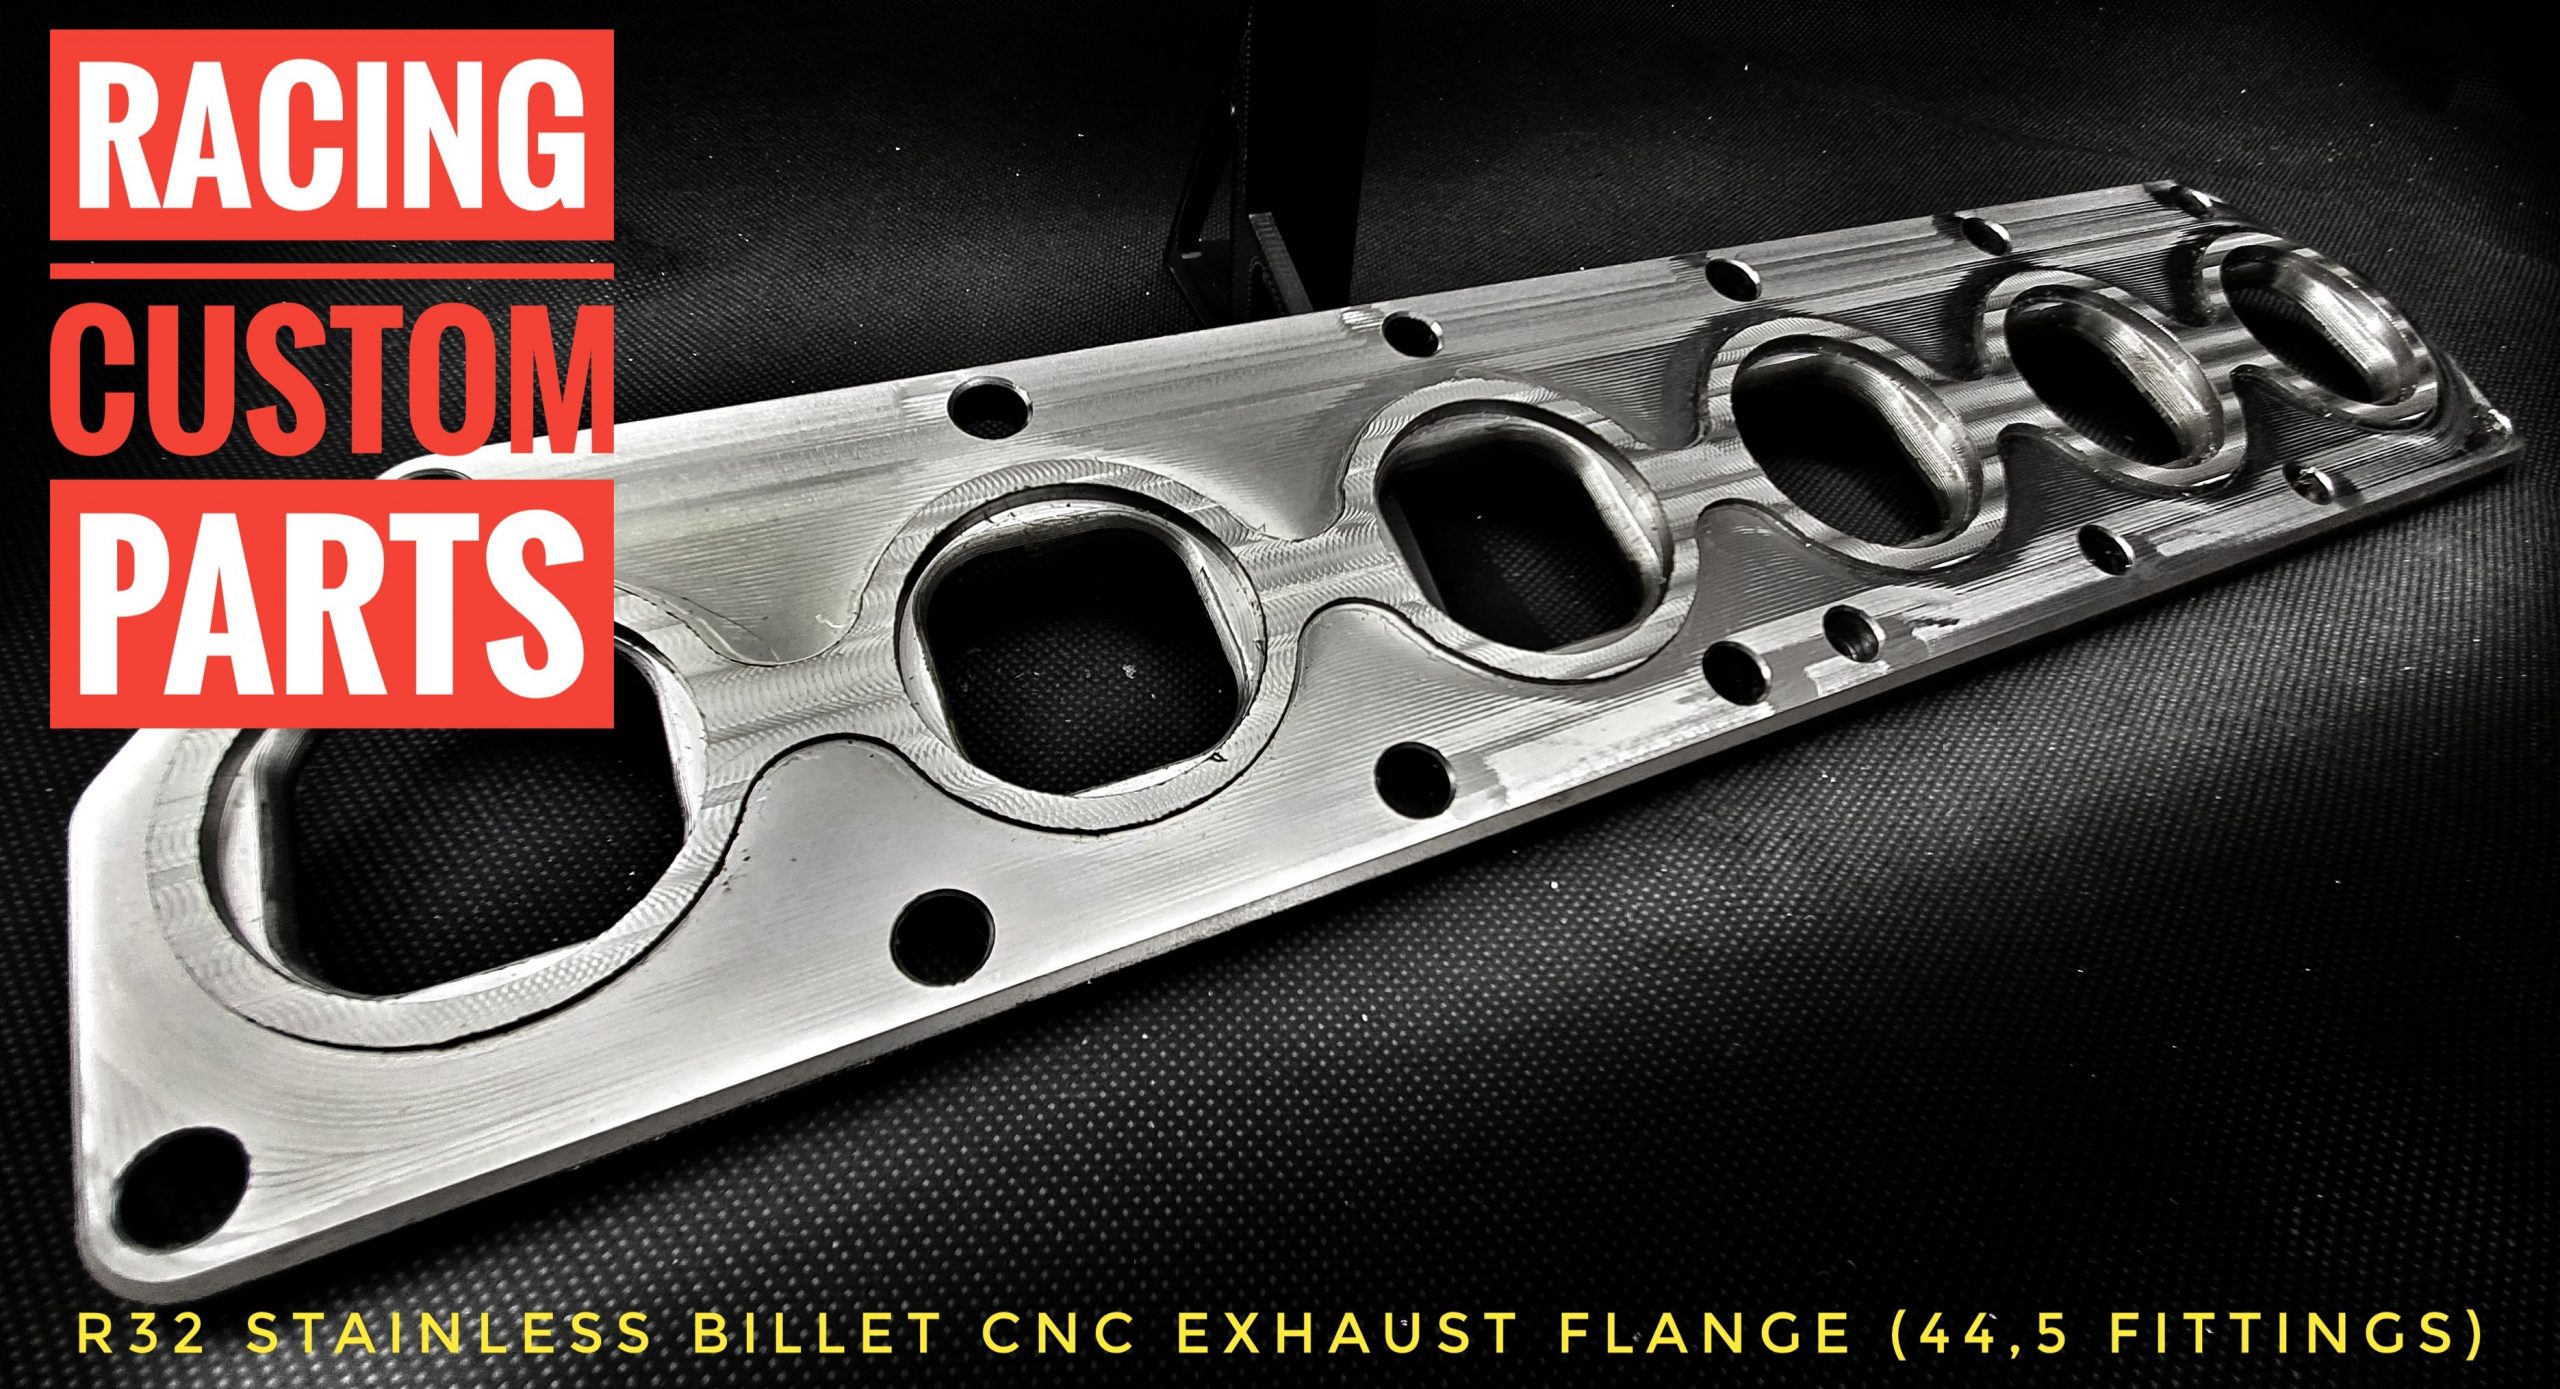 R32 3,2 v6 audi vw stainless steel exhaust plate billet cnc racing custom parts turbo